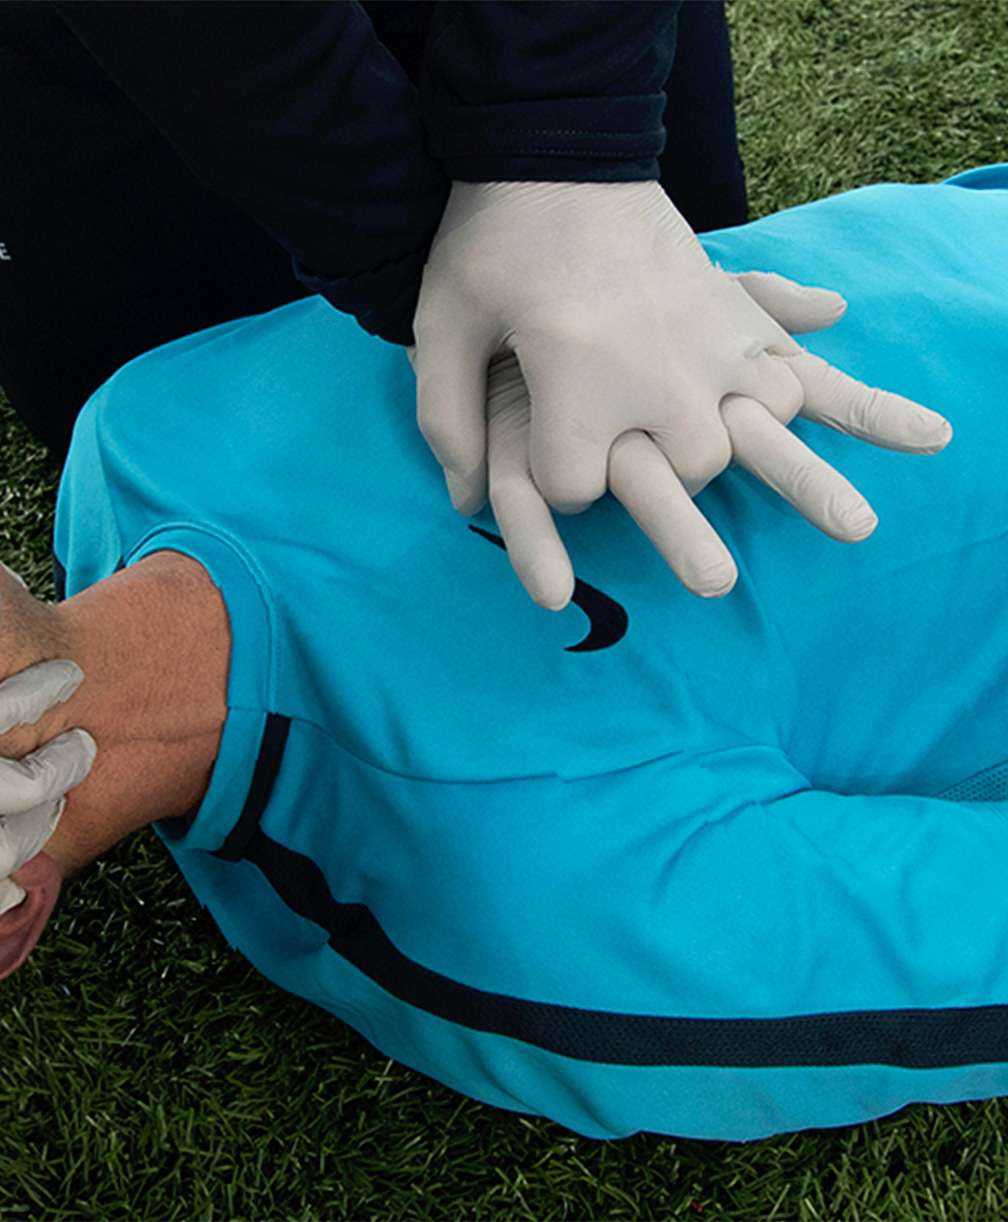 First aiders respond to a player experiencing sudden cardiac arrest